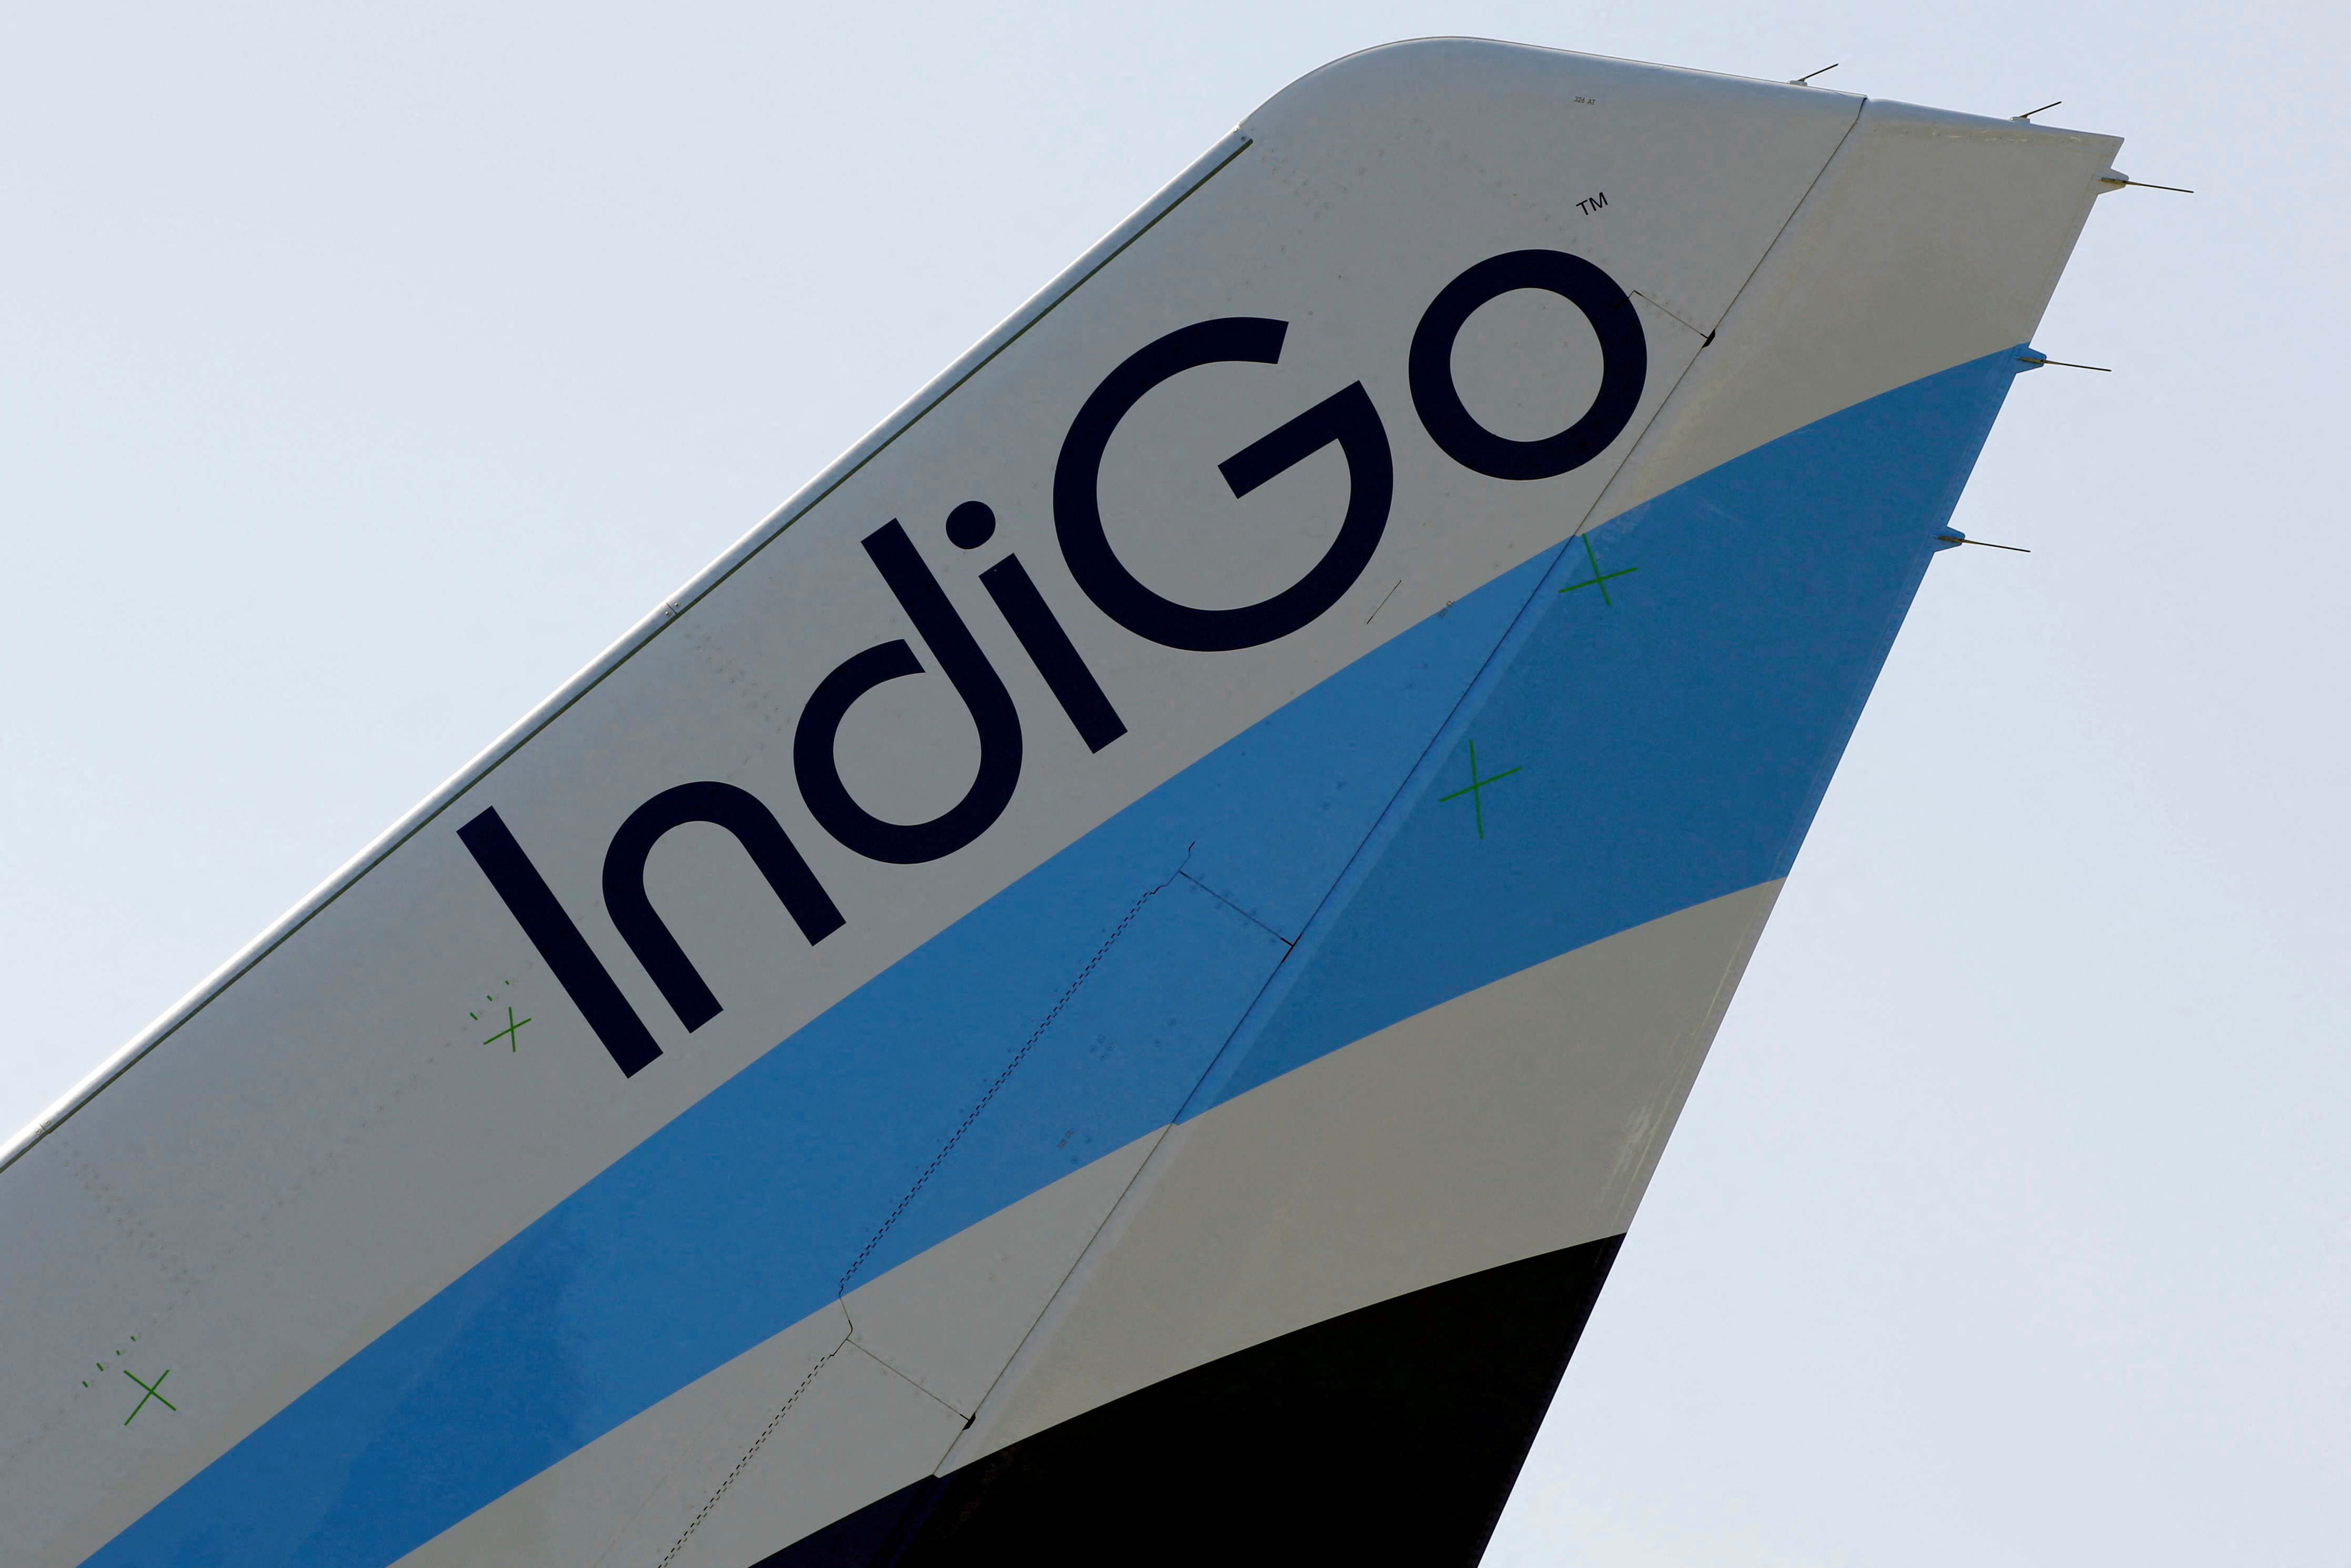 The logo of IndiGo Airlines is pictured on a passenger aircraft on the tarmac in Colomiers near Toulouse